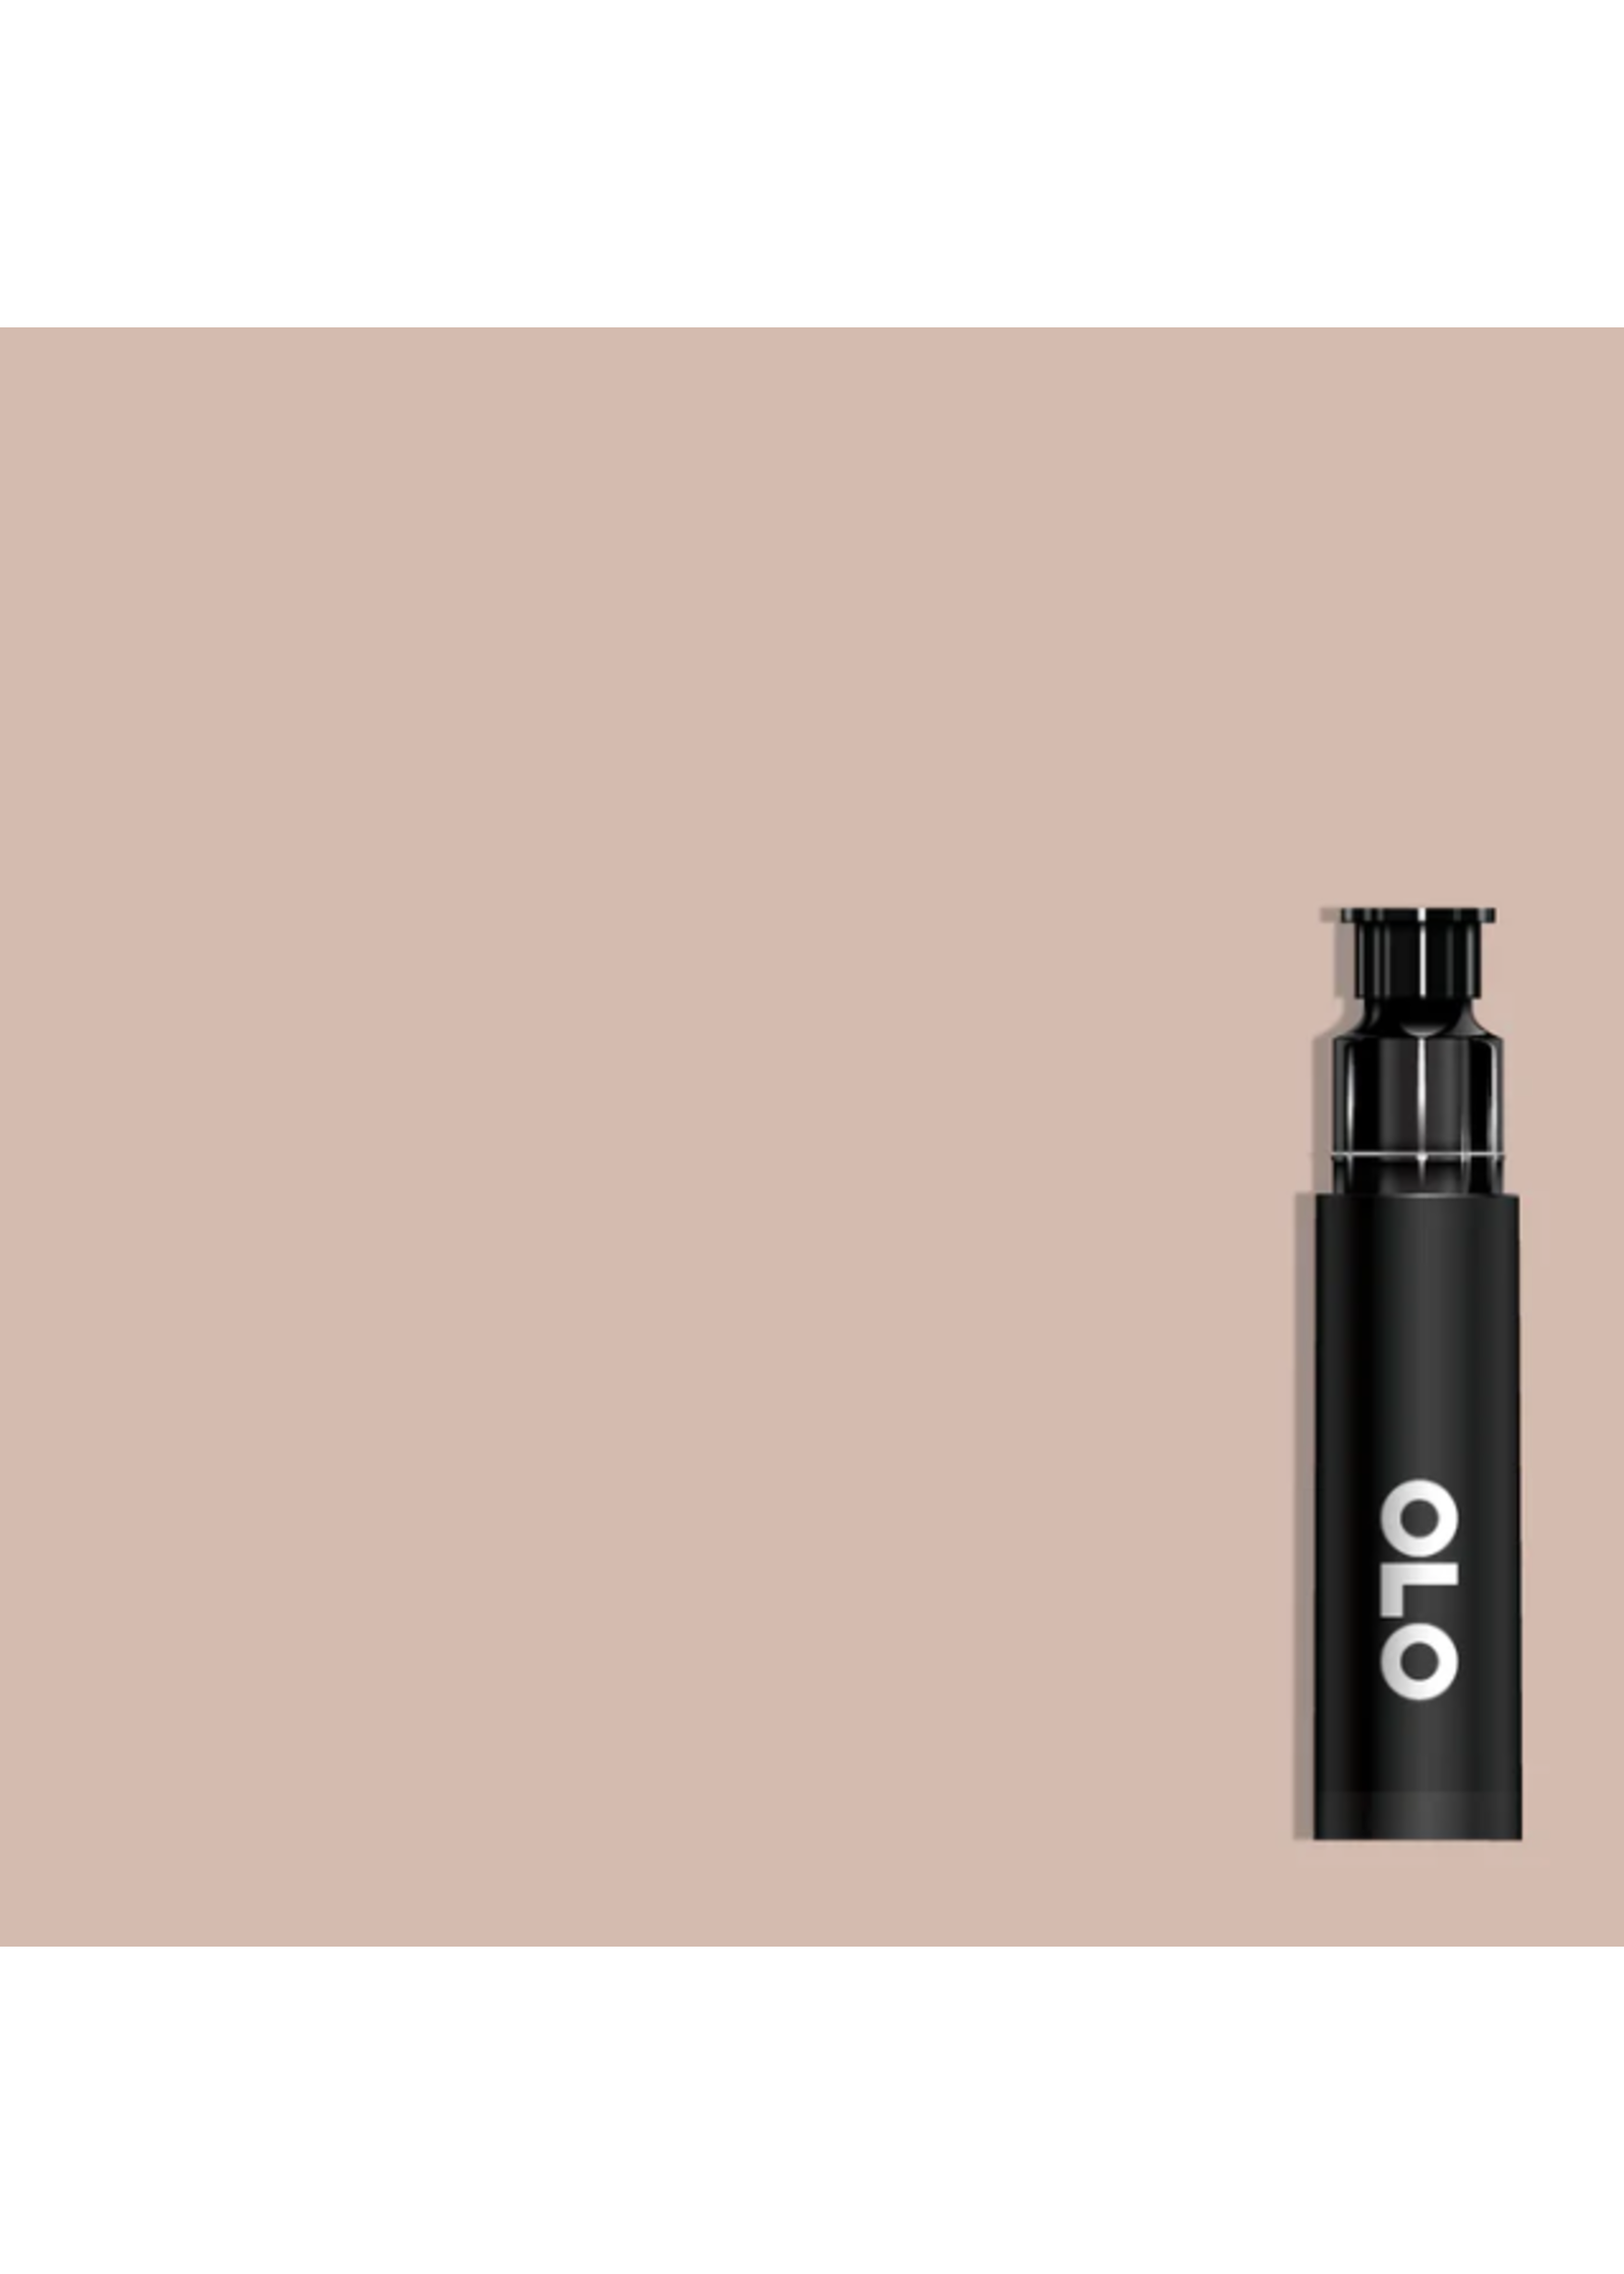 OLO OLO Brush Replacement Cartridge: Rose Beige